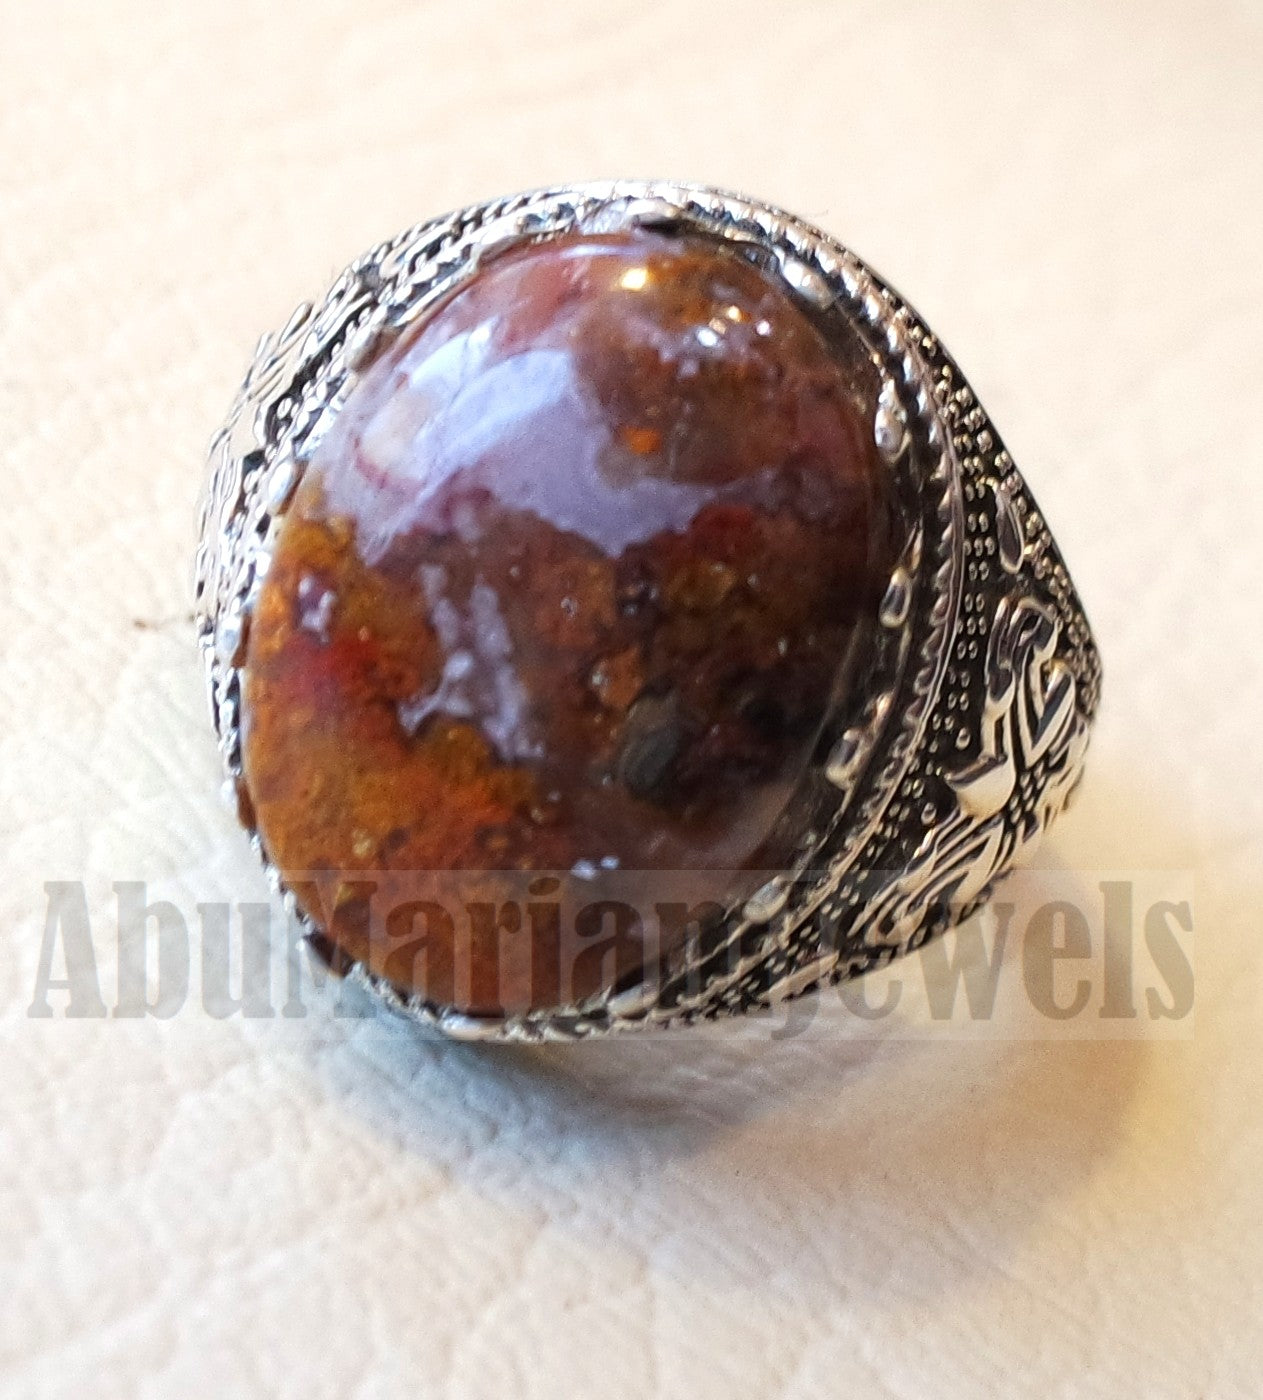 Agua nevada aqeeq sulymani natural Mexican stone sterling silver 925 man ring ottoman turkey antique style any size عقيق سليماني